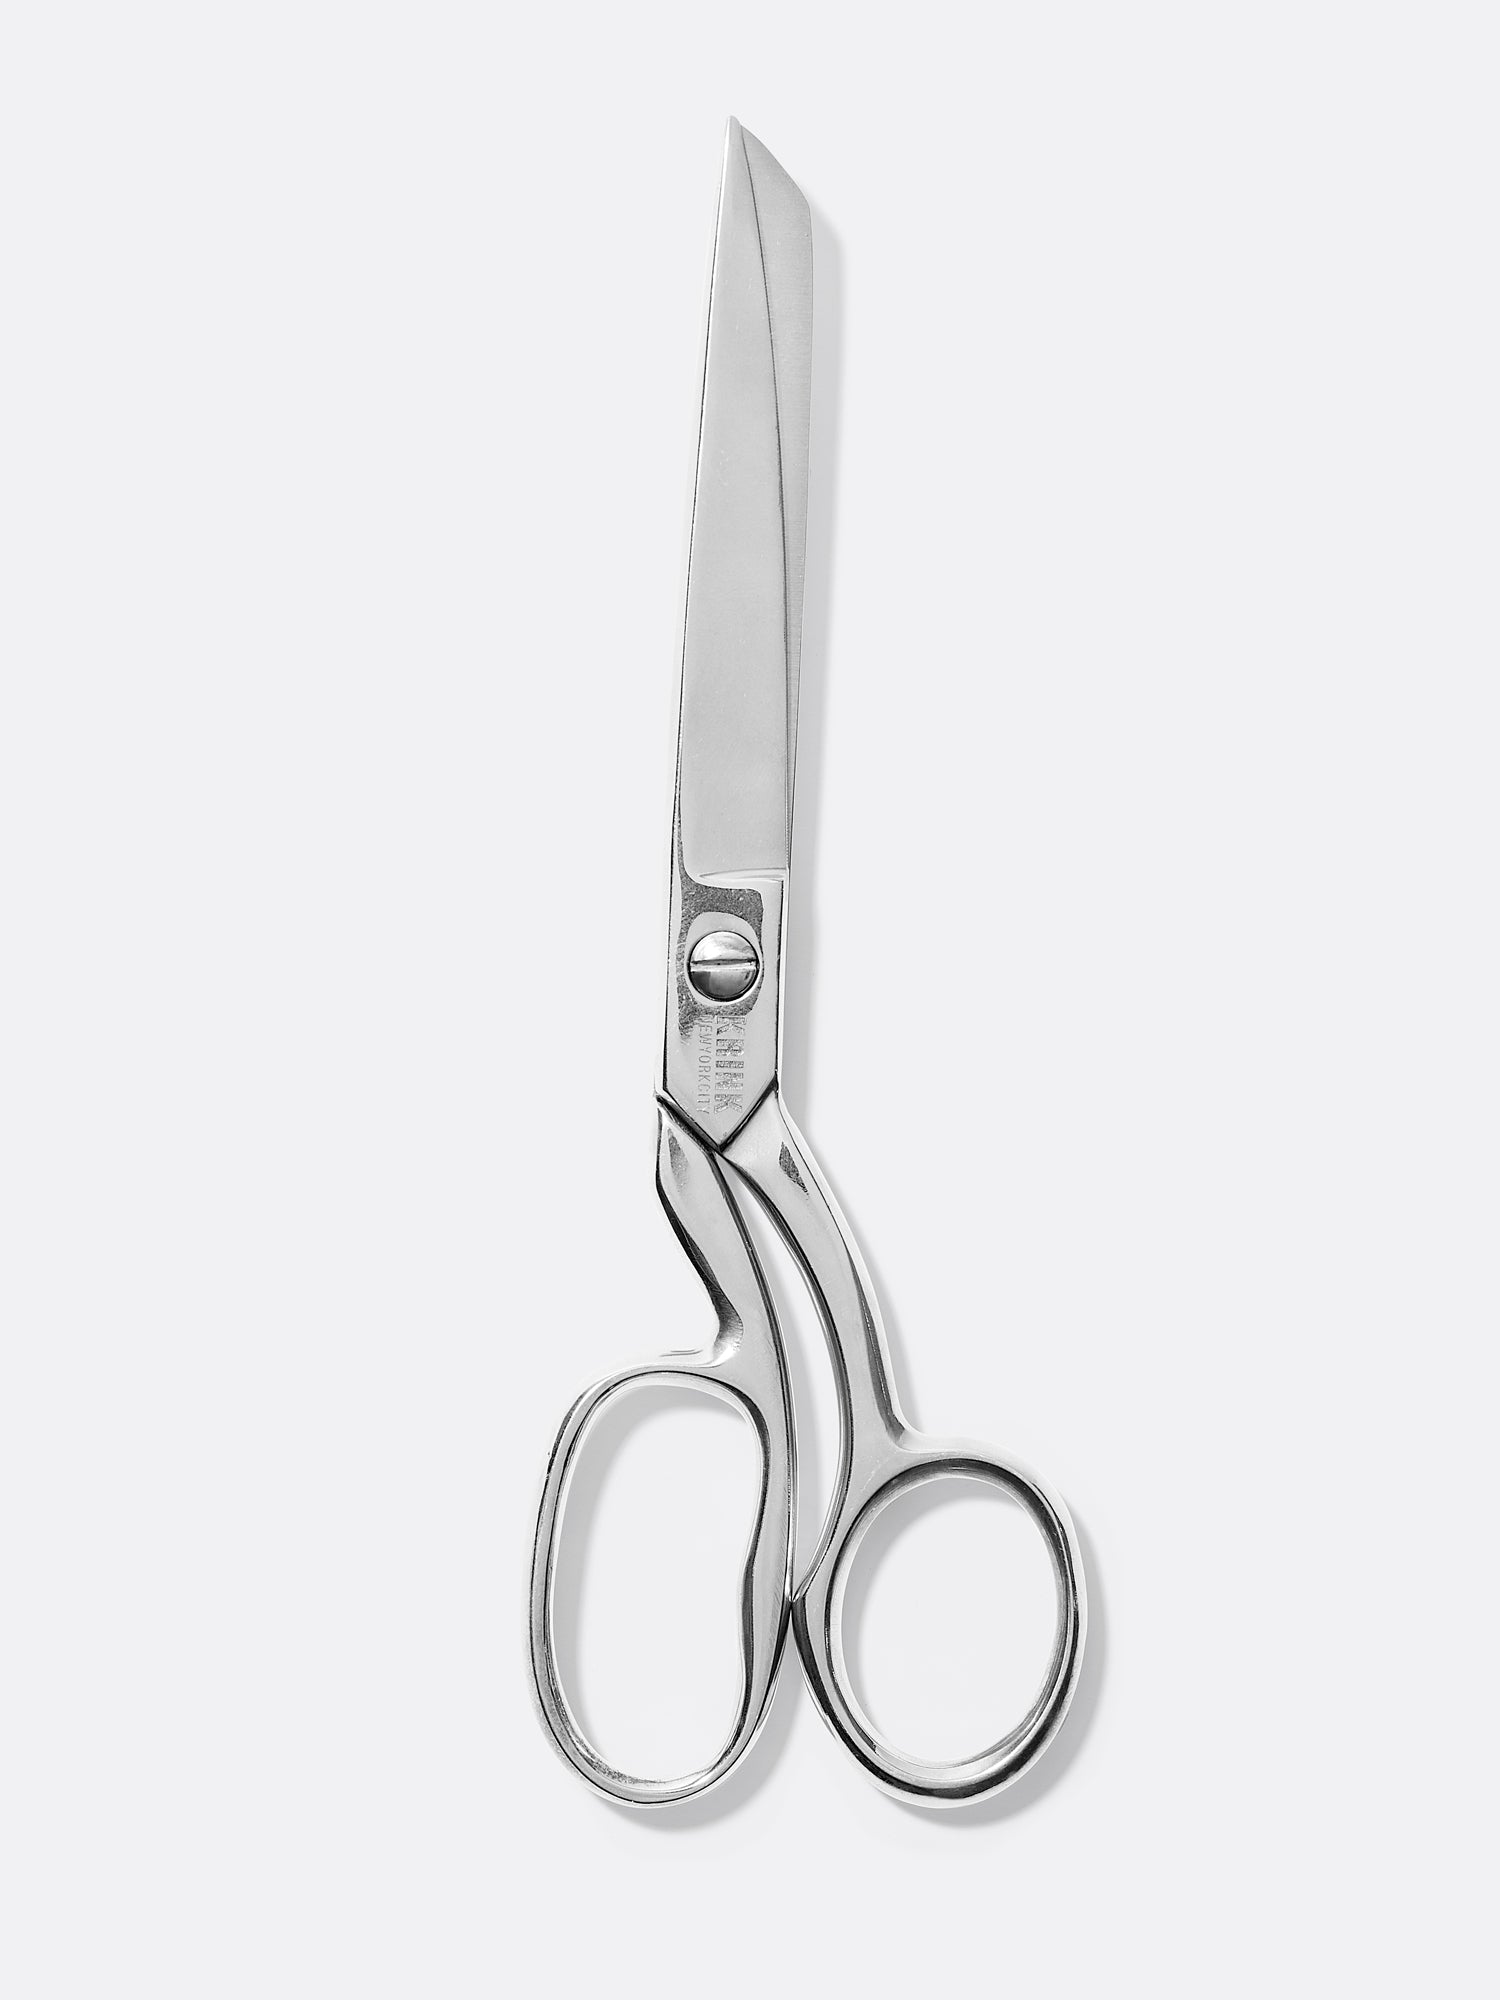 Drop Forged American made scissors, these two are about 30 years old and  the sharpest in the house. : r/Skookum